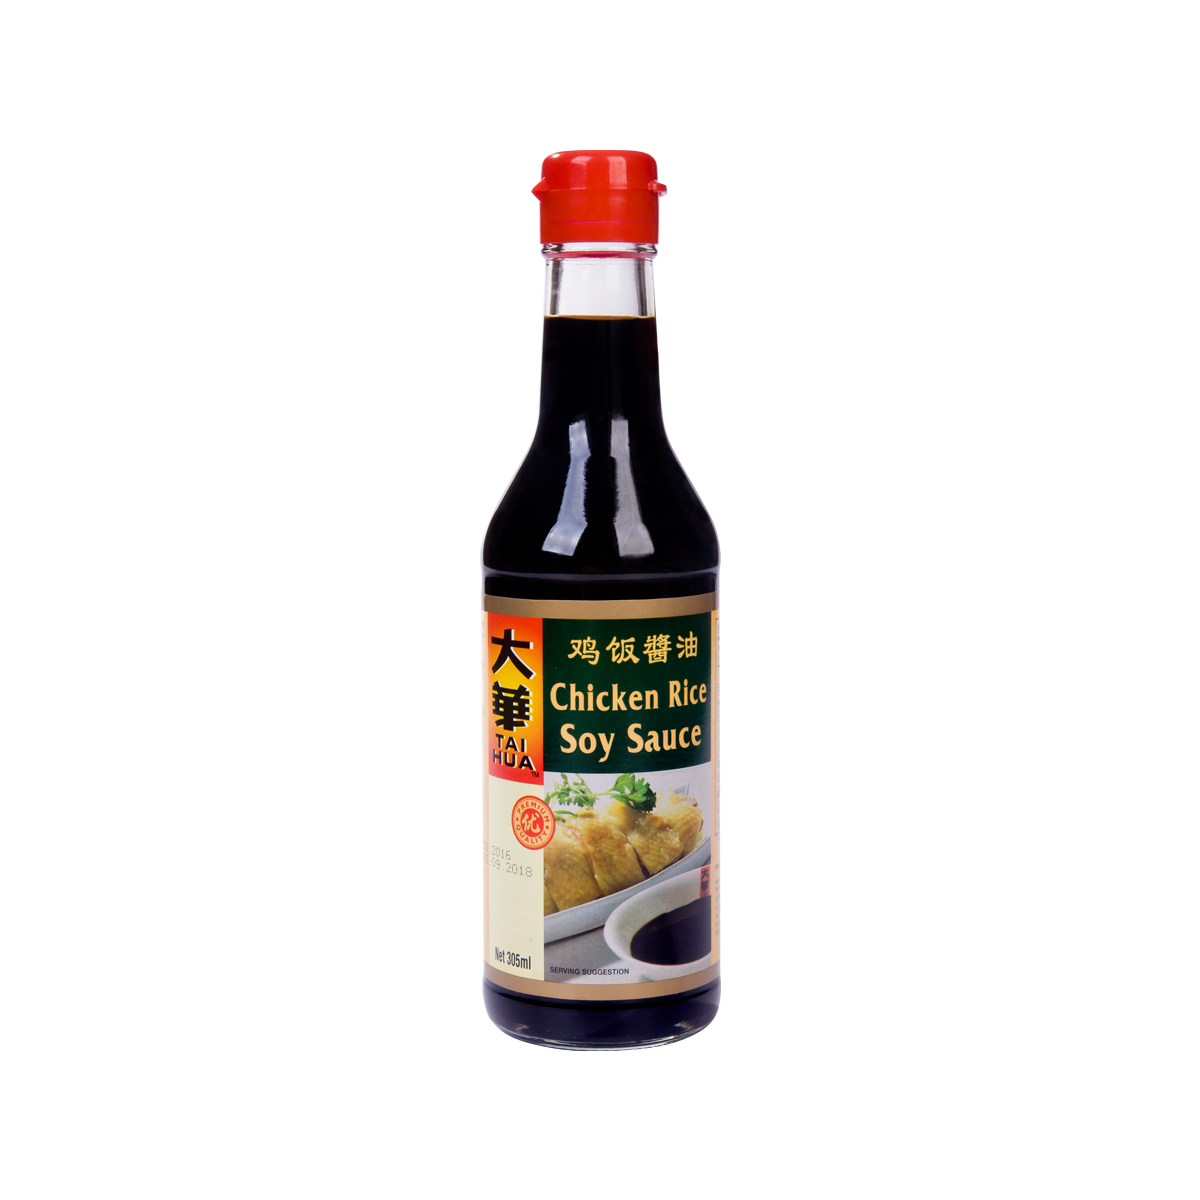 Chicken Rice Soy Sauce - 305ml